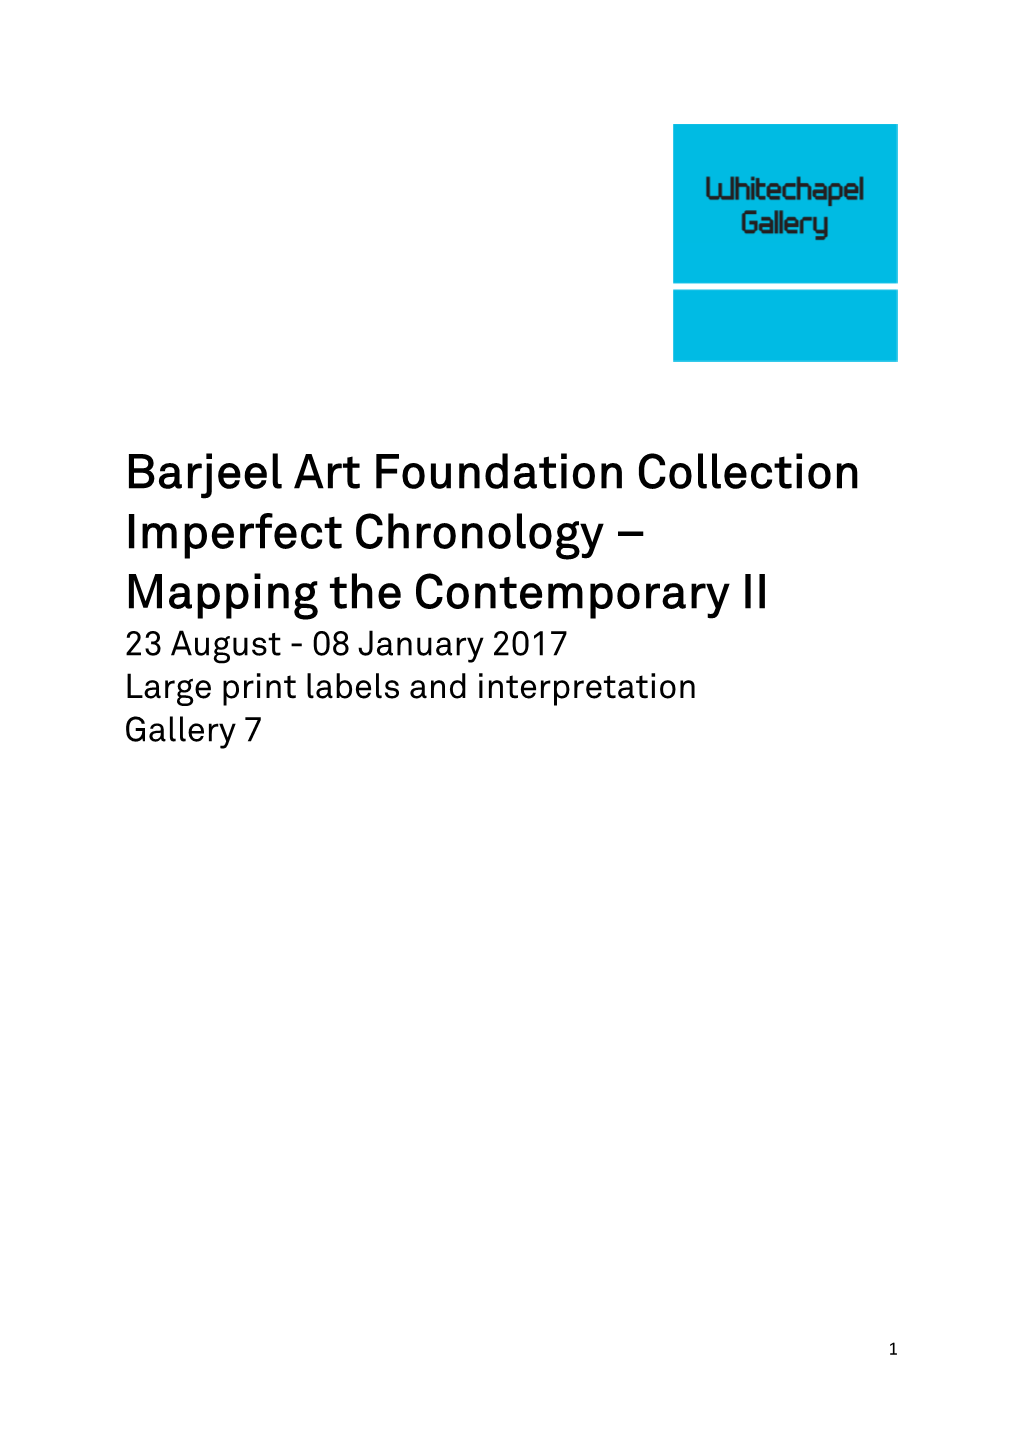 Barjeel Art Foundation Collection Imperfect Chronology – Mapping the Contemporary II 23 August - 08 January 2017 Large Print Labels and Interpretation Gallery 7